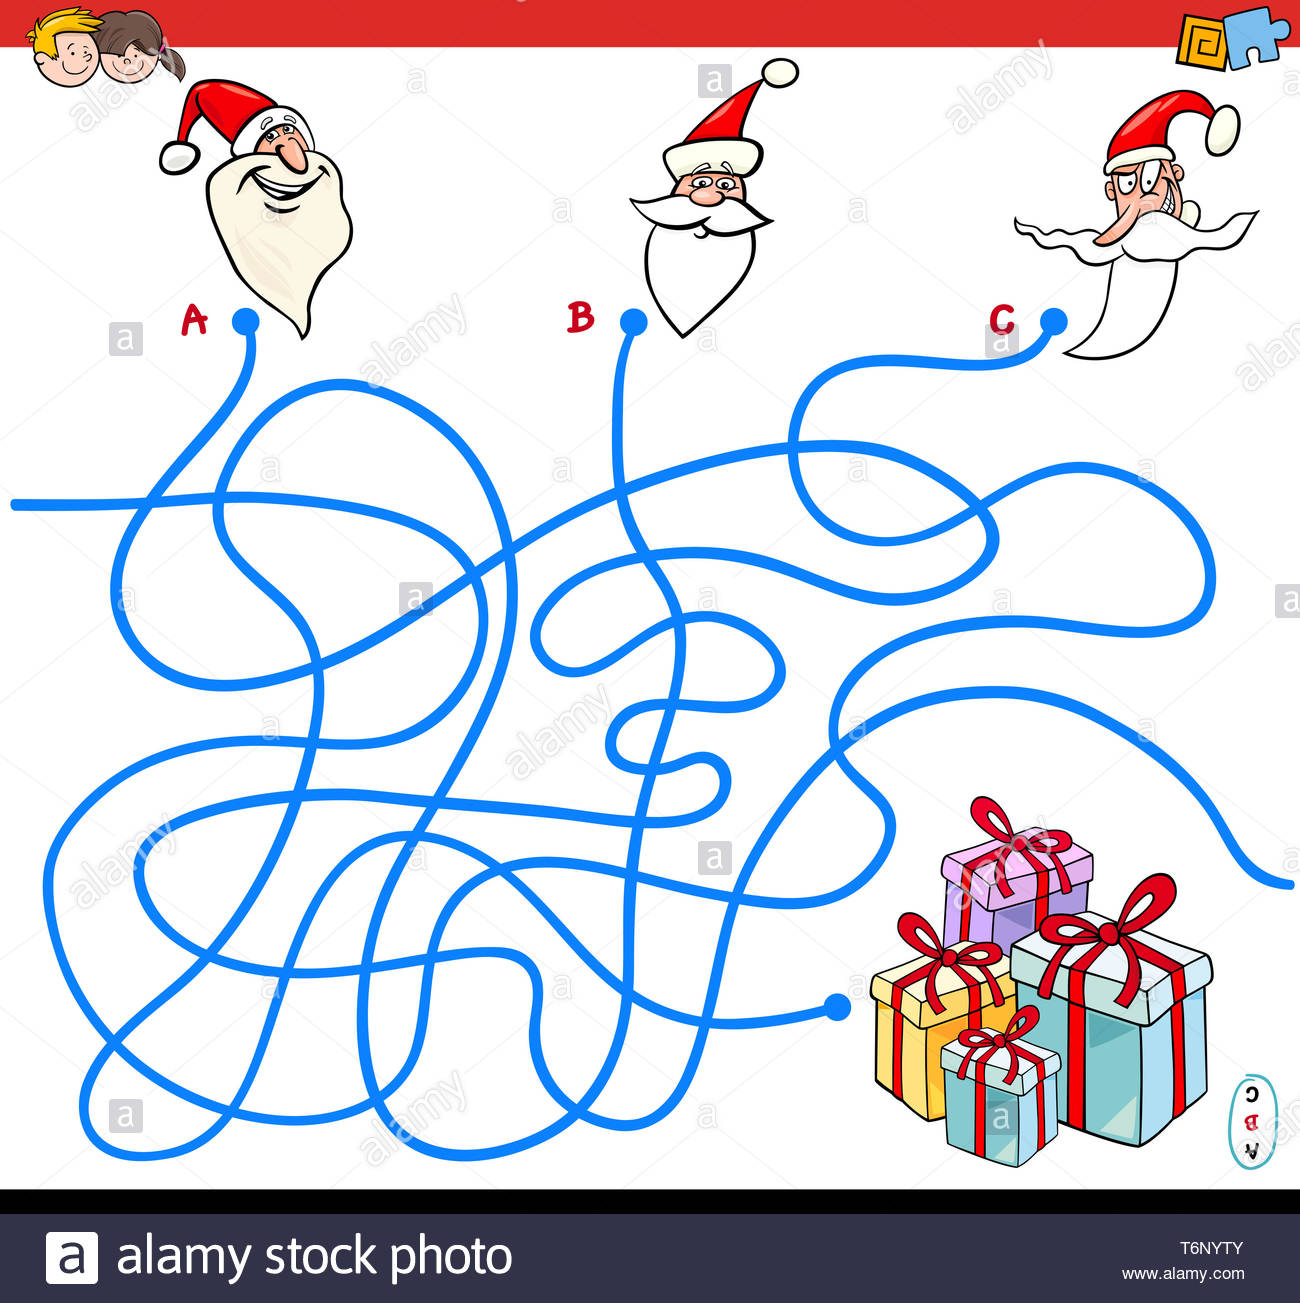 Lines Maze Game With Christmas Santa Characters Stock Photo